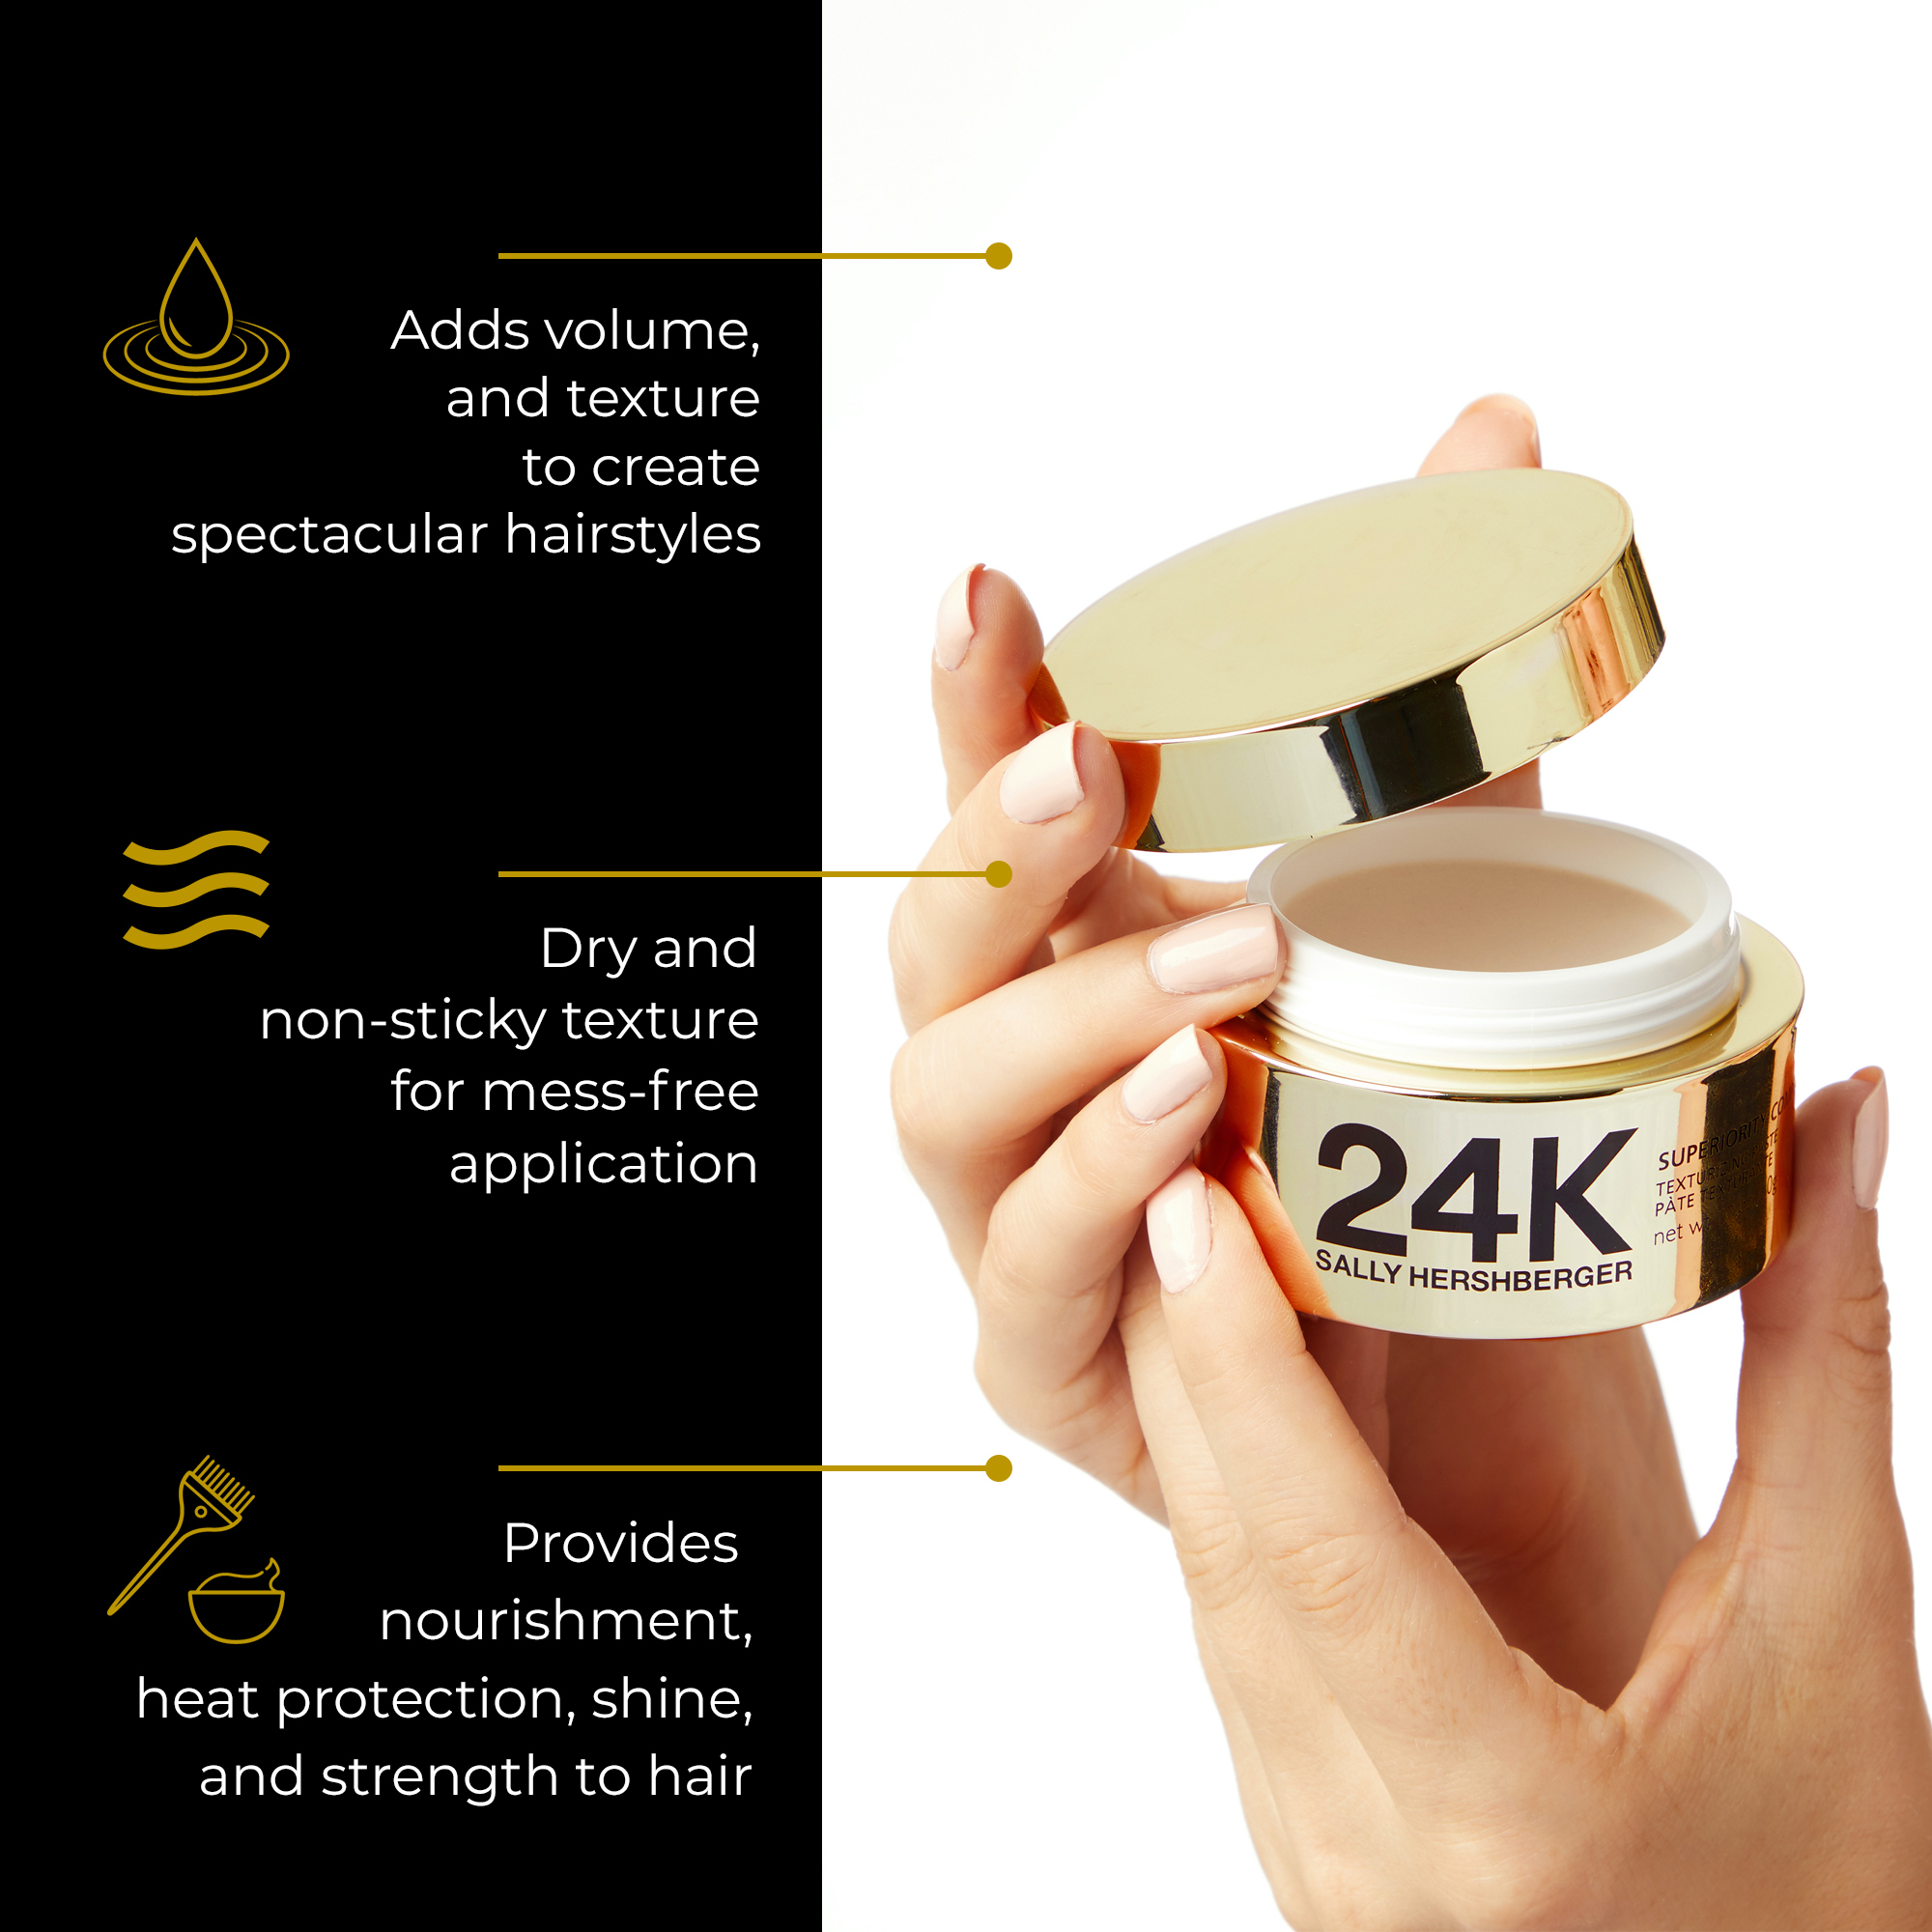 Sally Hershberger 24K Superiority Complex Texturizing Hair Paste, 1.7 oz - image 2 of 8